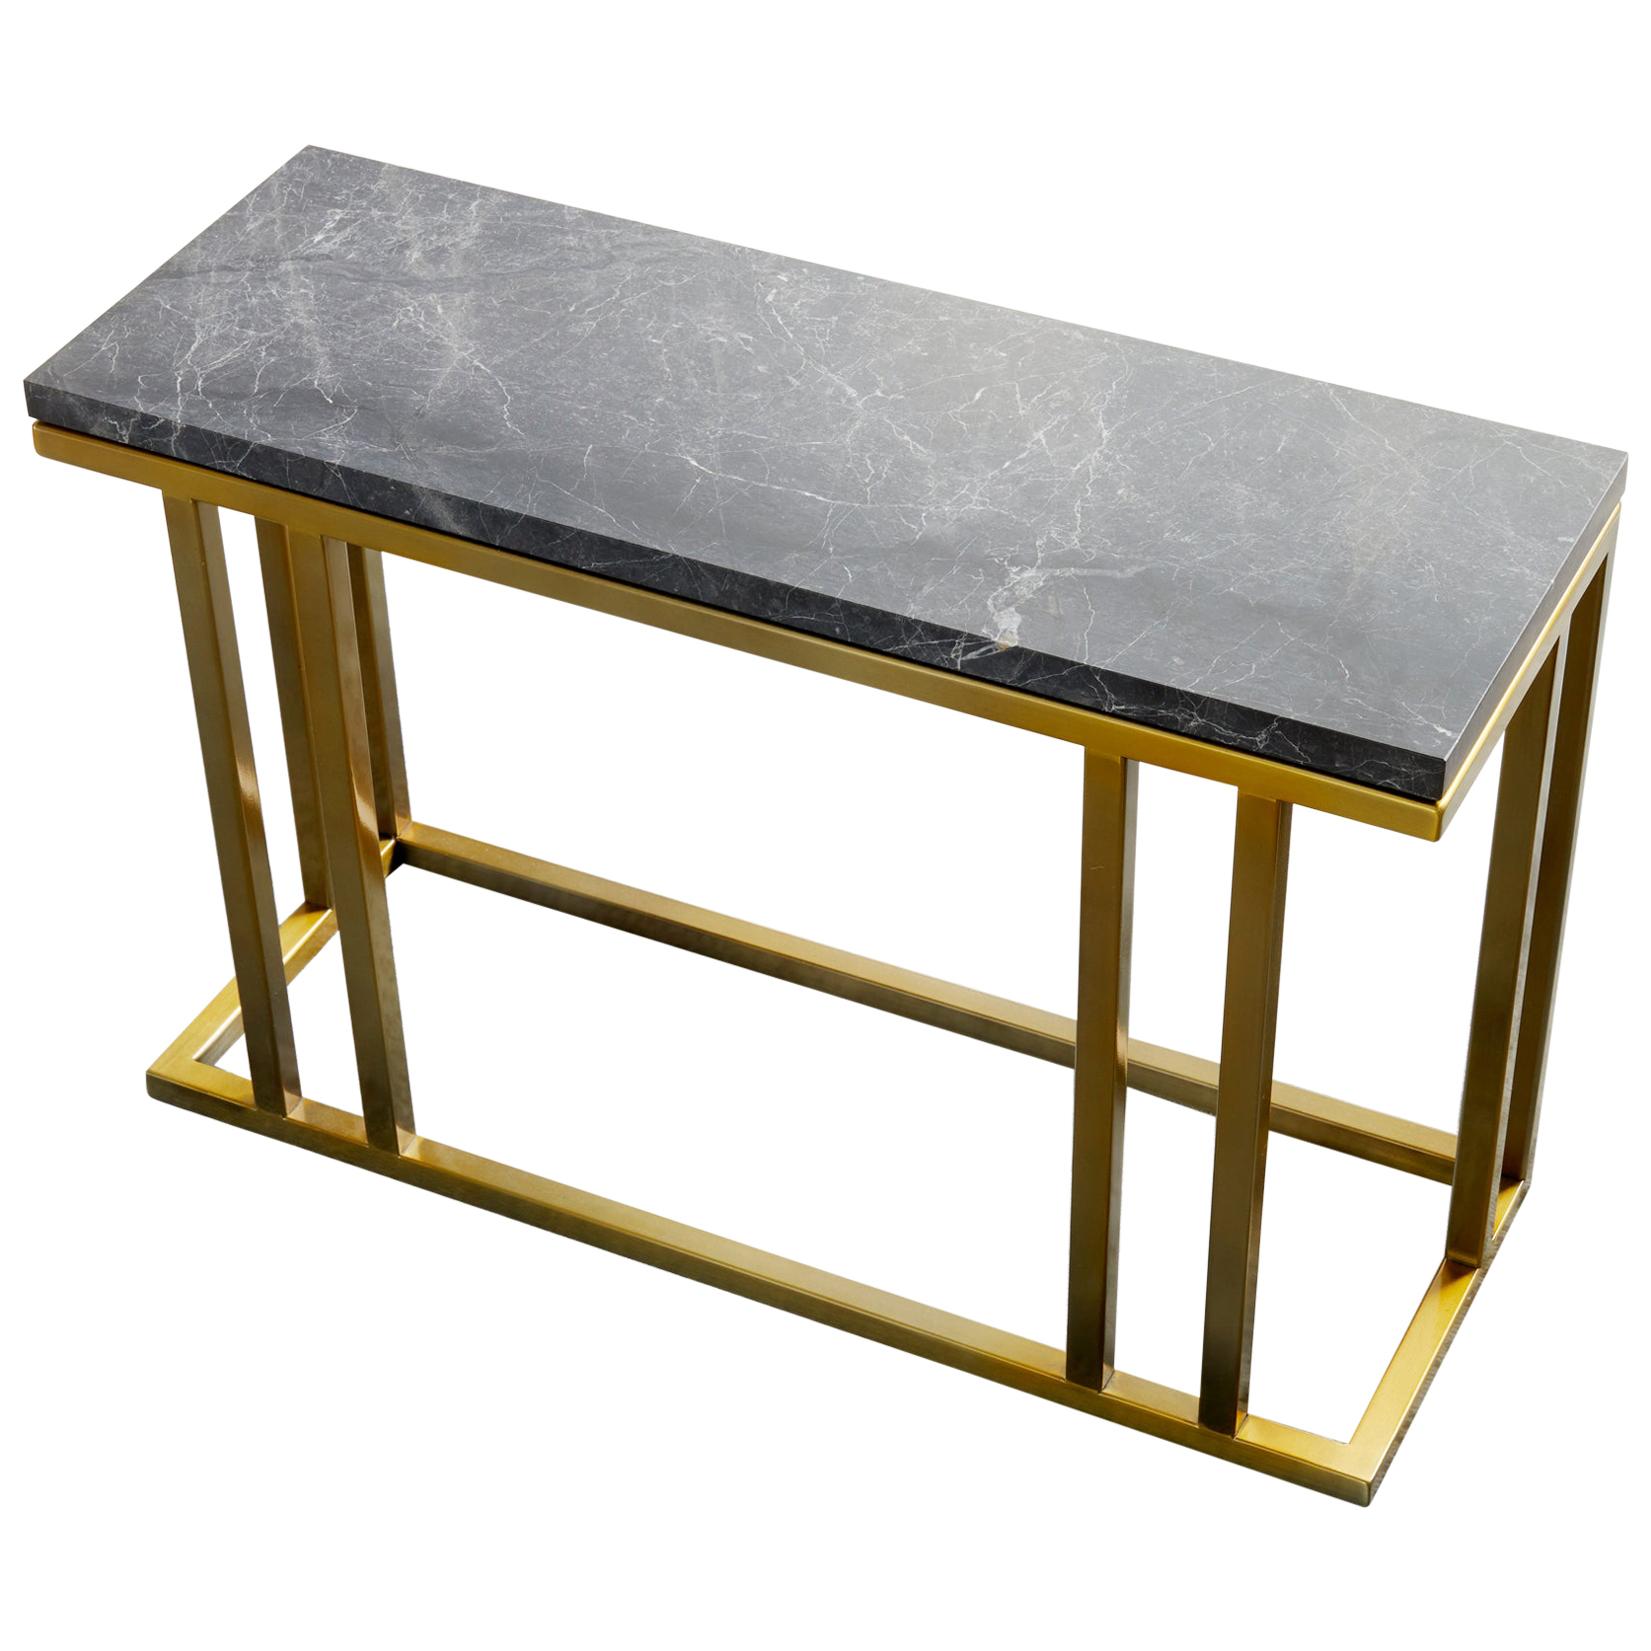 Art Deco Inspired Elio Slim Side Table Antique Brass Tint and Marble